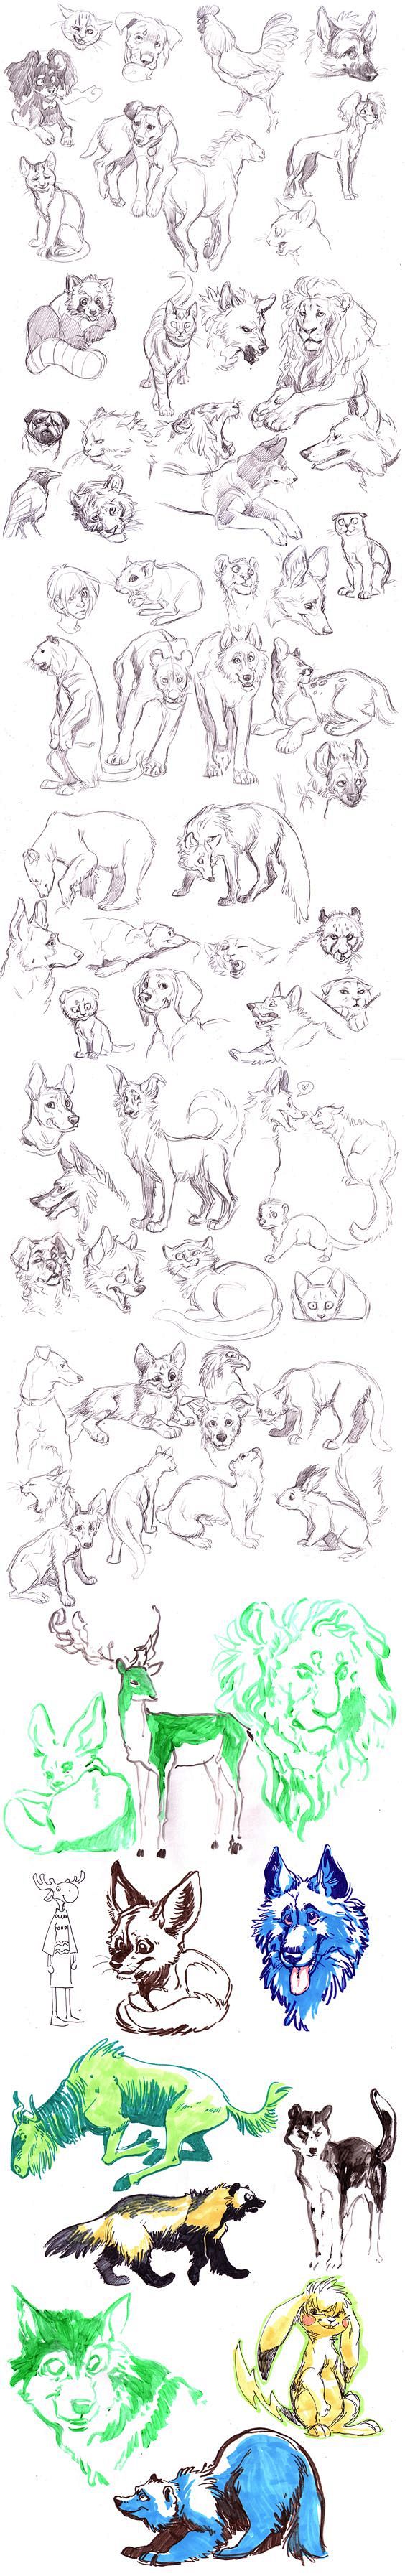 Animals Sketches by ...